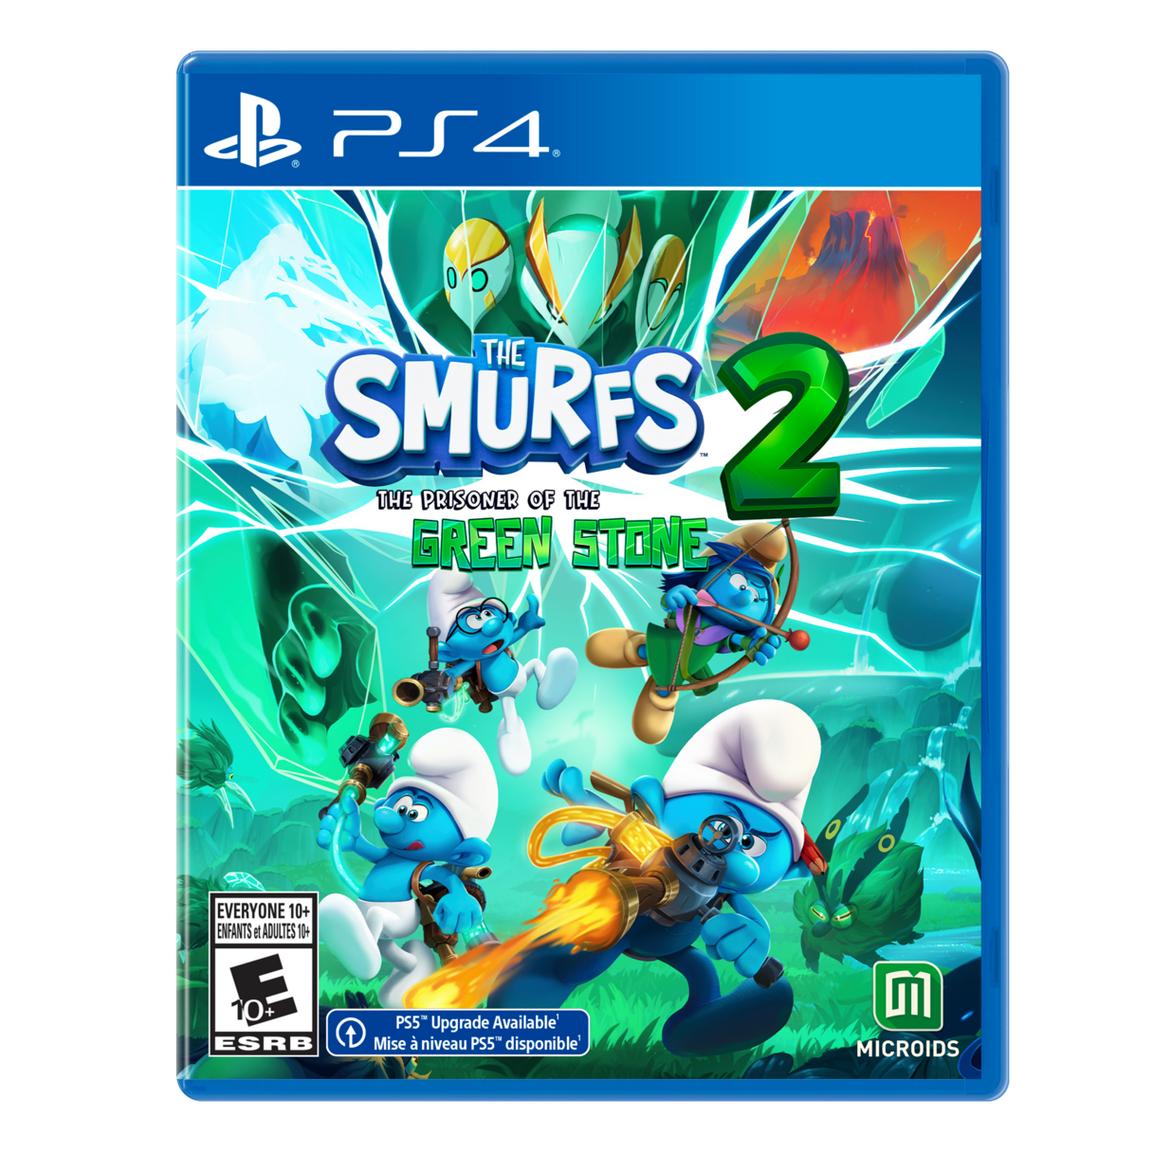 Видеоигра The Smurfs 2: Prisoner of the Green Stone - PlayStation 4 ps4 игра microids arkanoid eternal battle limited edition